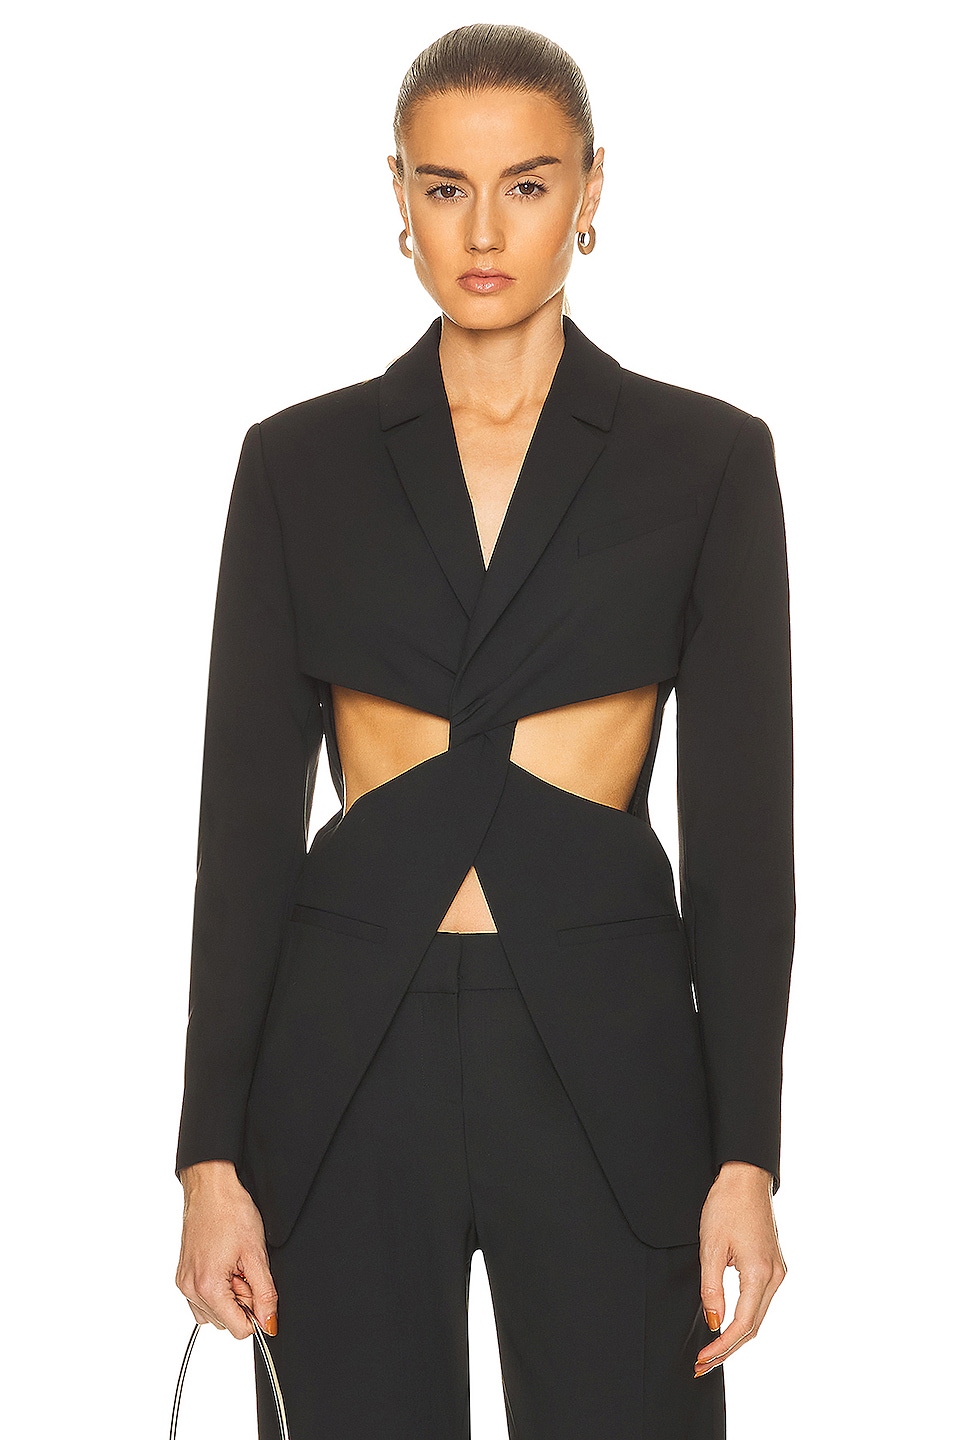 Coperni Twisted Cut Out Tailored Jacket in Black | FWRD